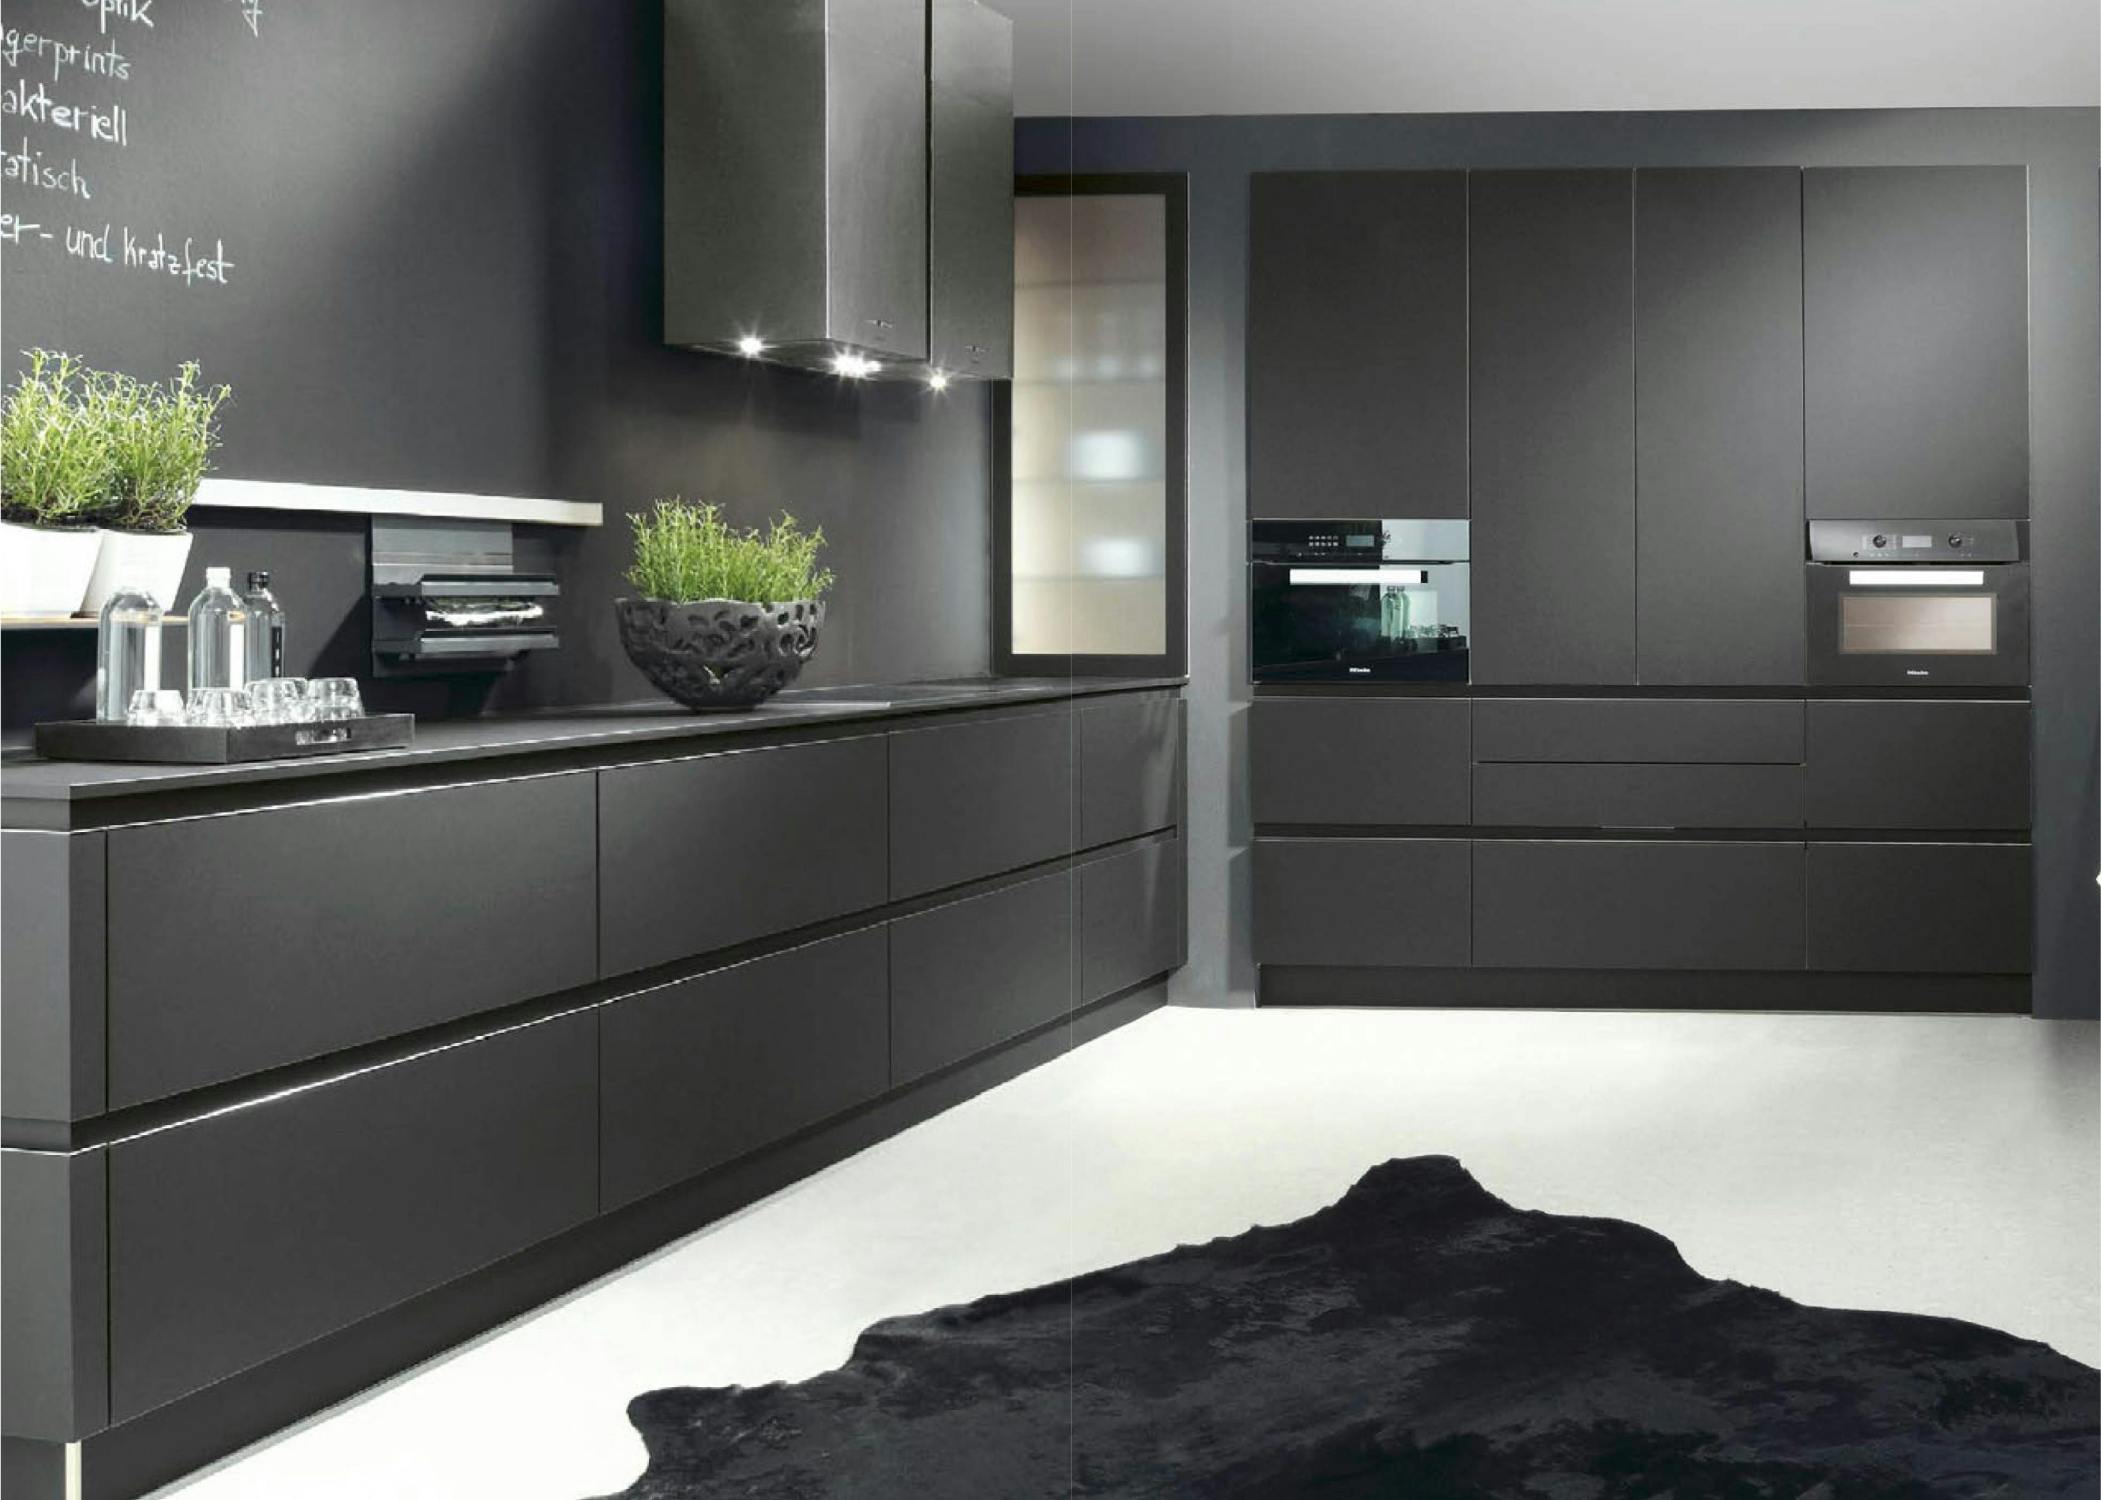 modern kitchen design with space grey wood and marbel with lights and elegant design with a lot of space and leather carpet and oven and microwave